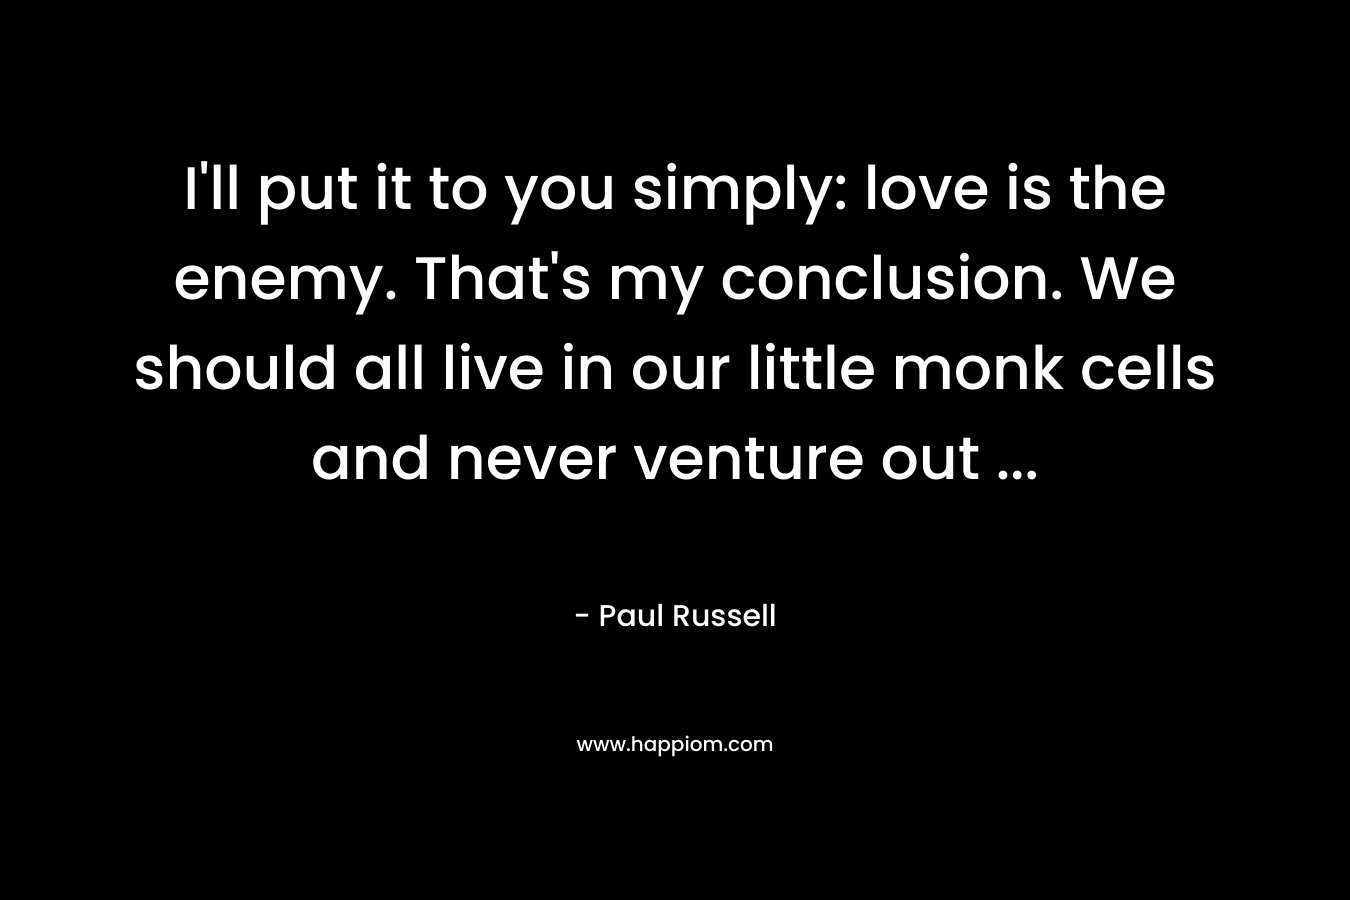 I’ll put it to you simply: love is the enemy. That’s my conclusion. We should all live in our little monk cells and never venture out … – Paul Russell